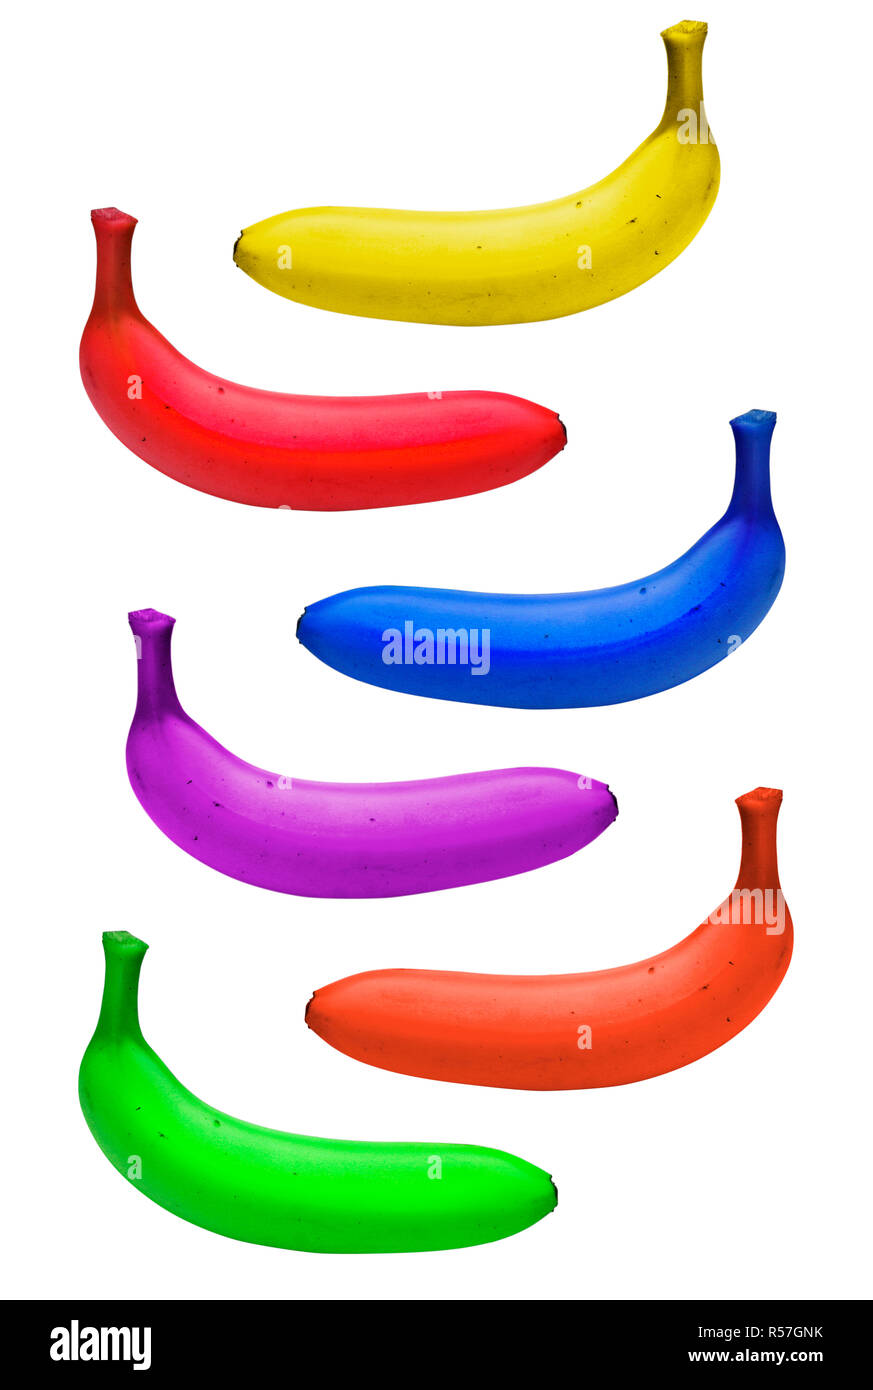 bananas colorful colors concept Stock Photo